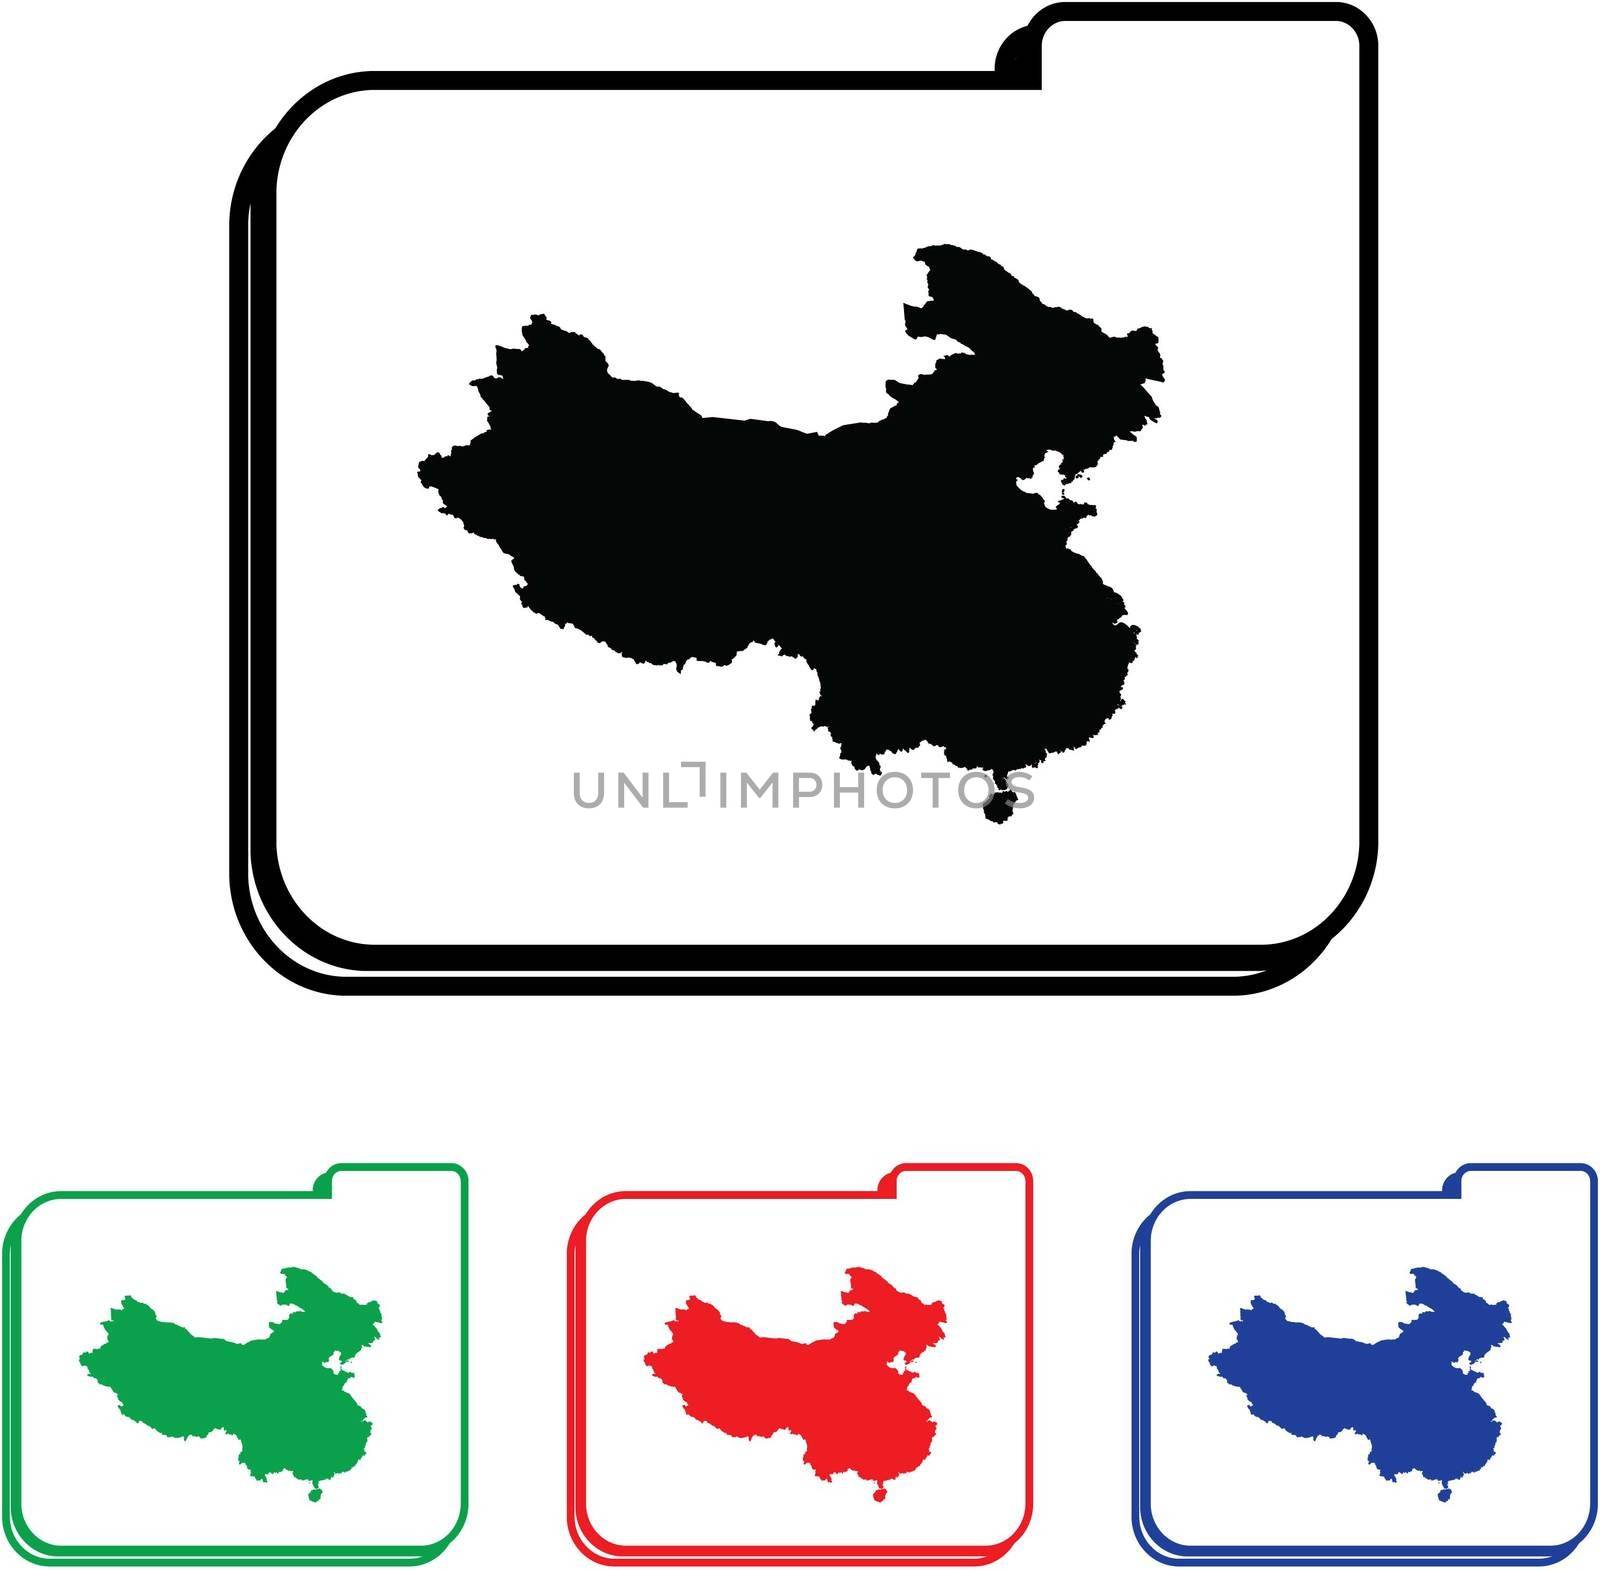 China Icon Illustration with Four Color Variations